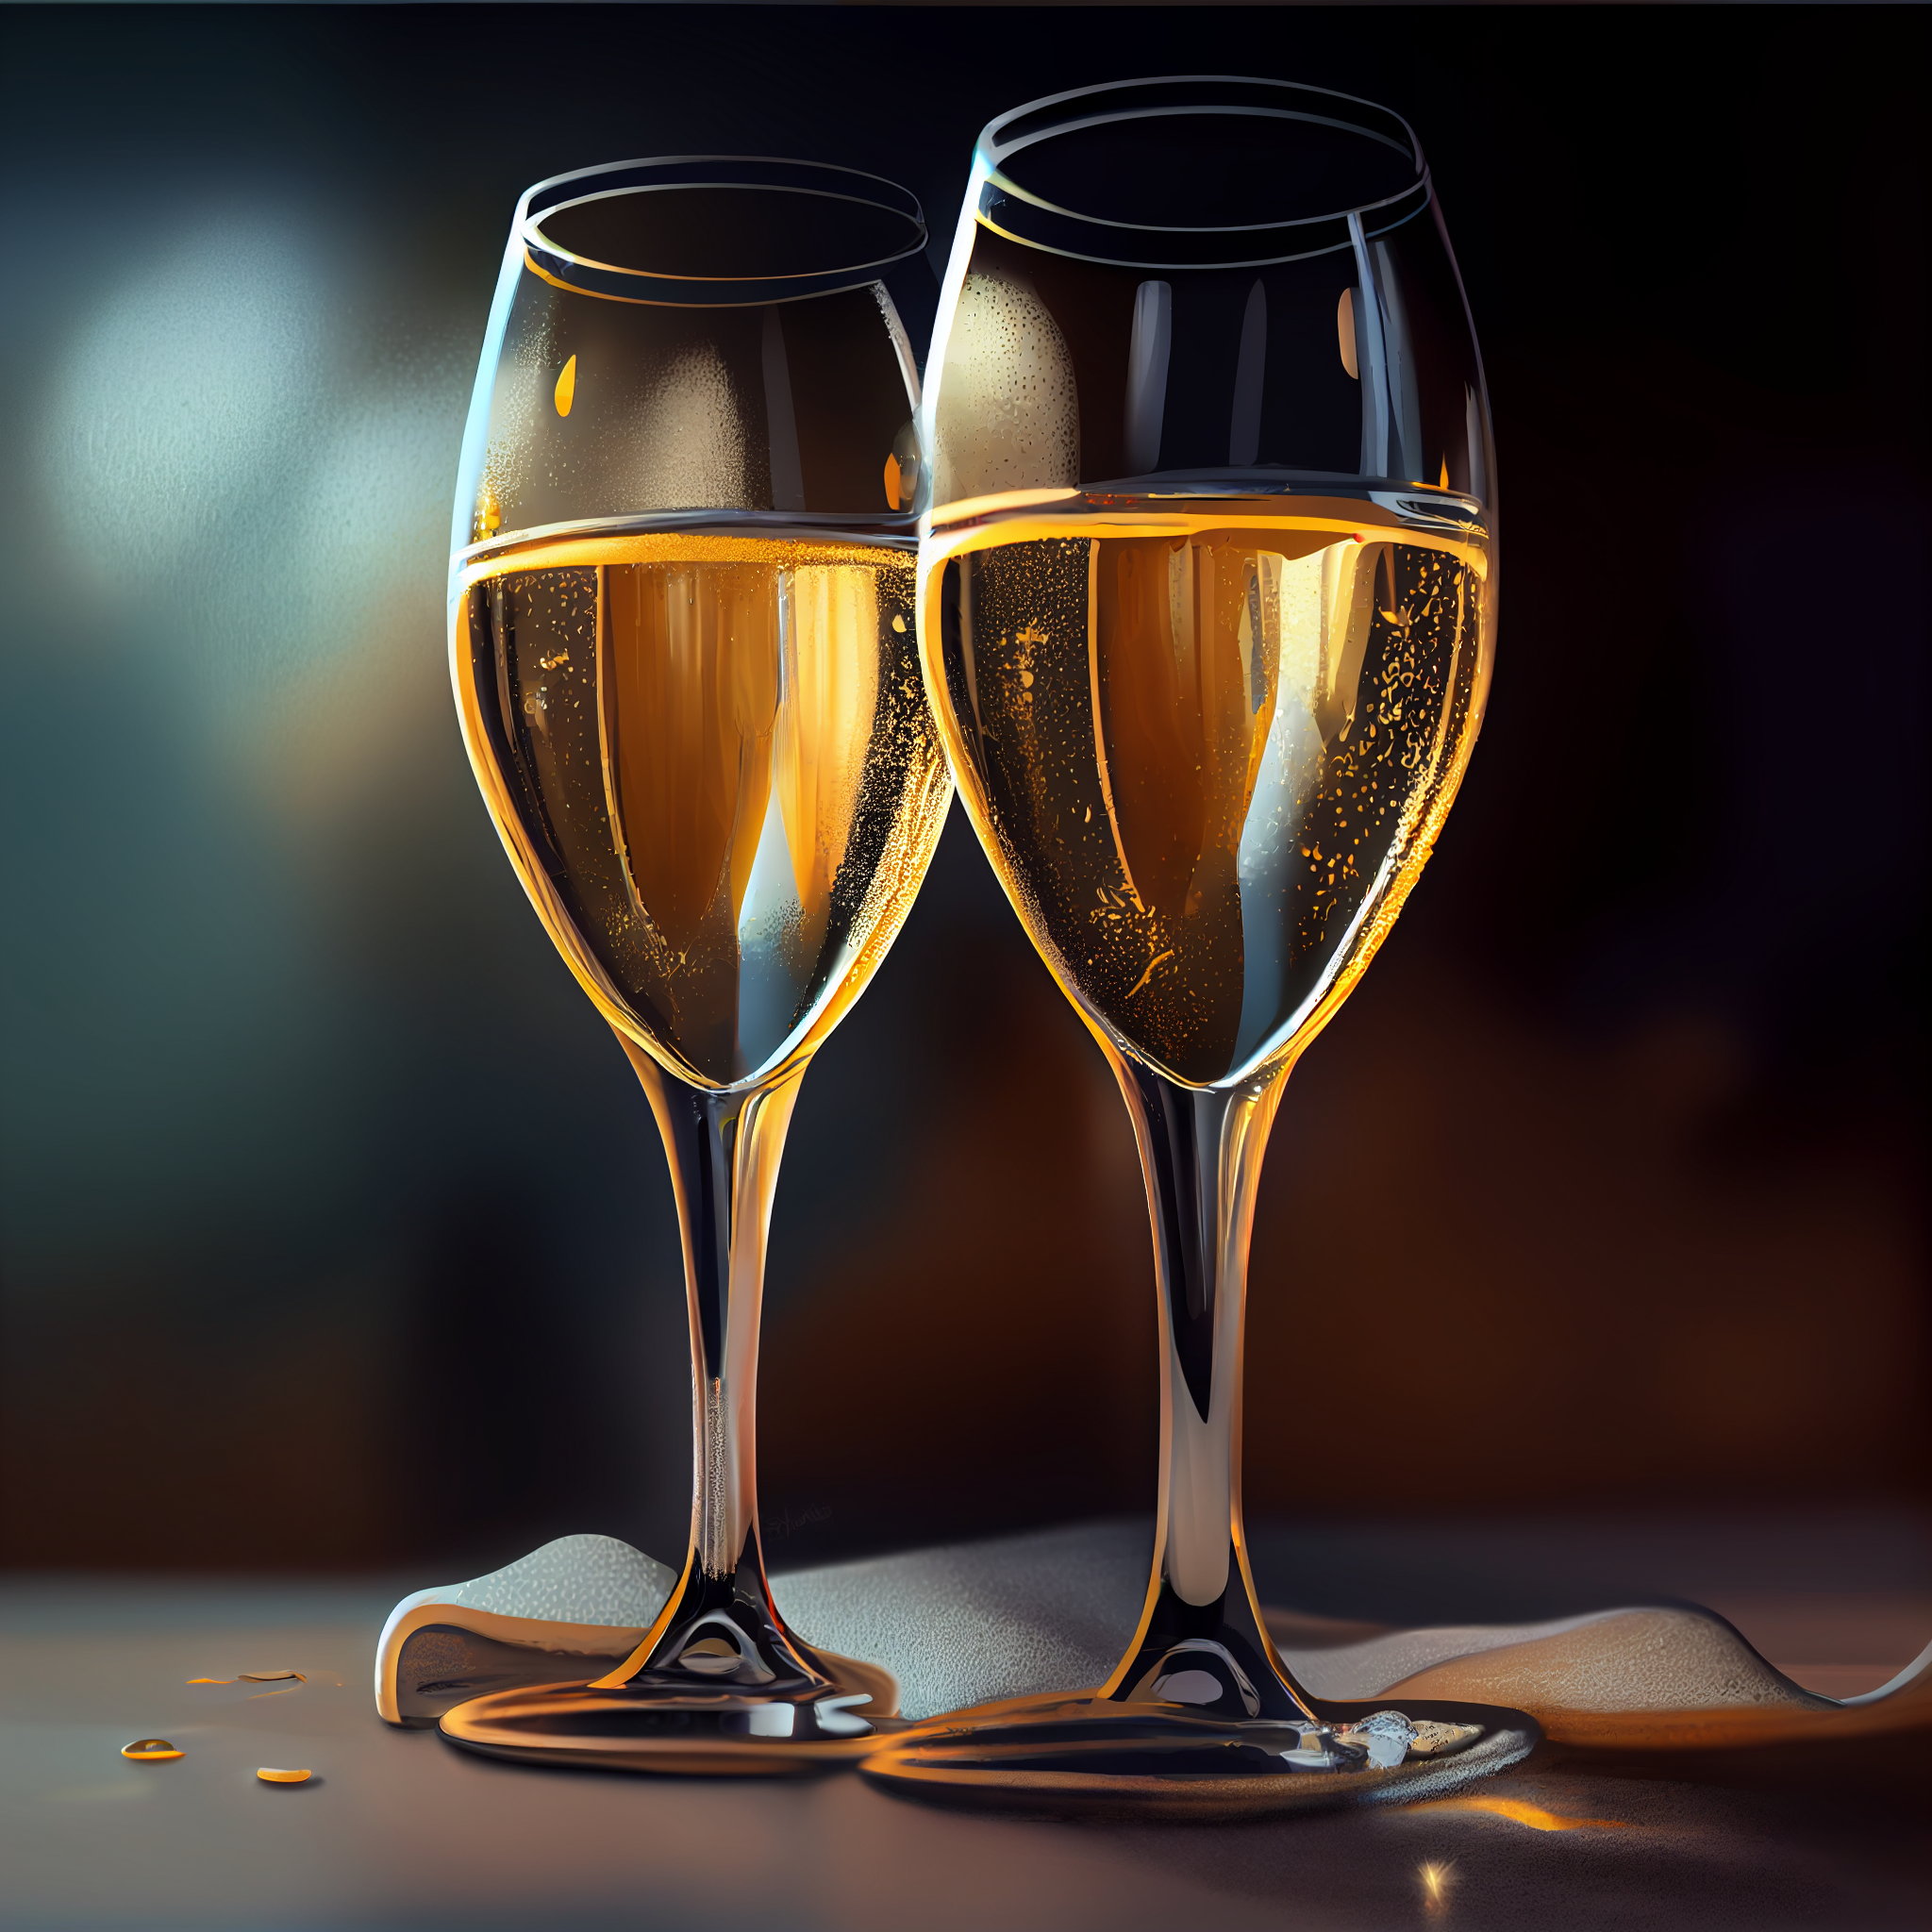 Sparkling Celebration: An Oil Painting Print of Two Champagne Glasses